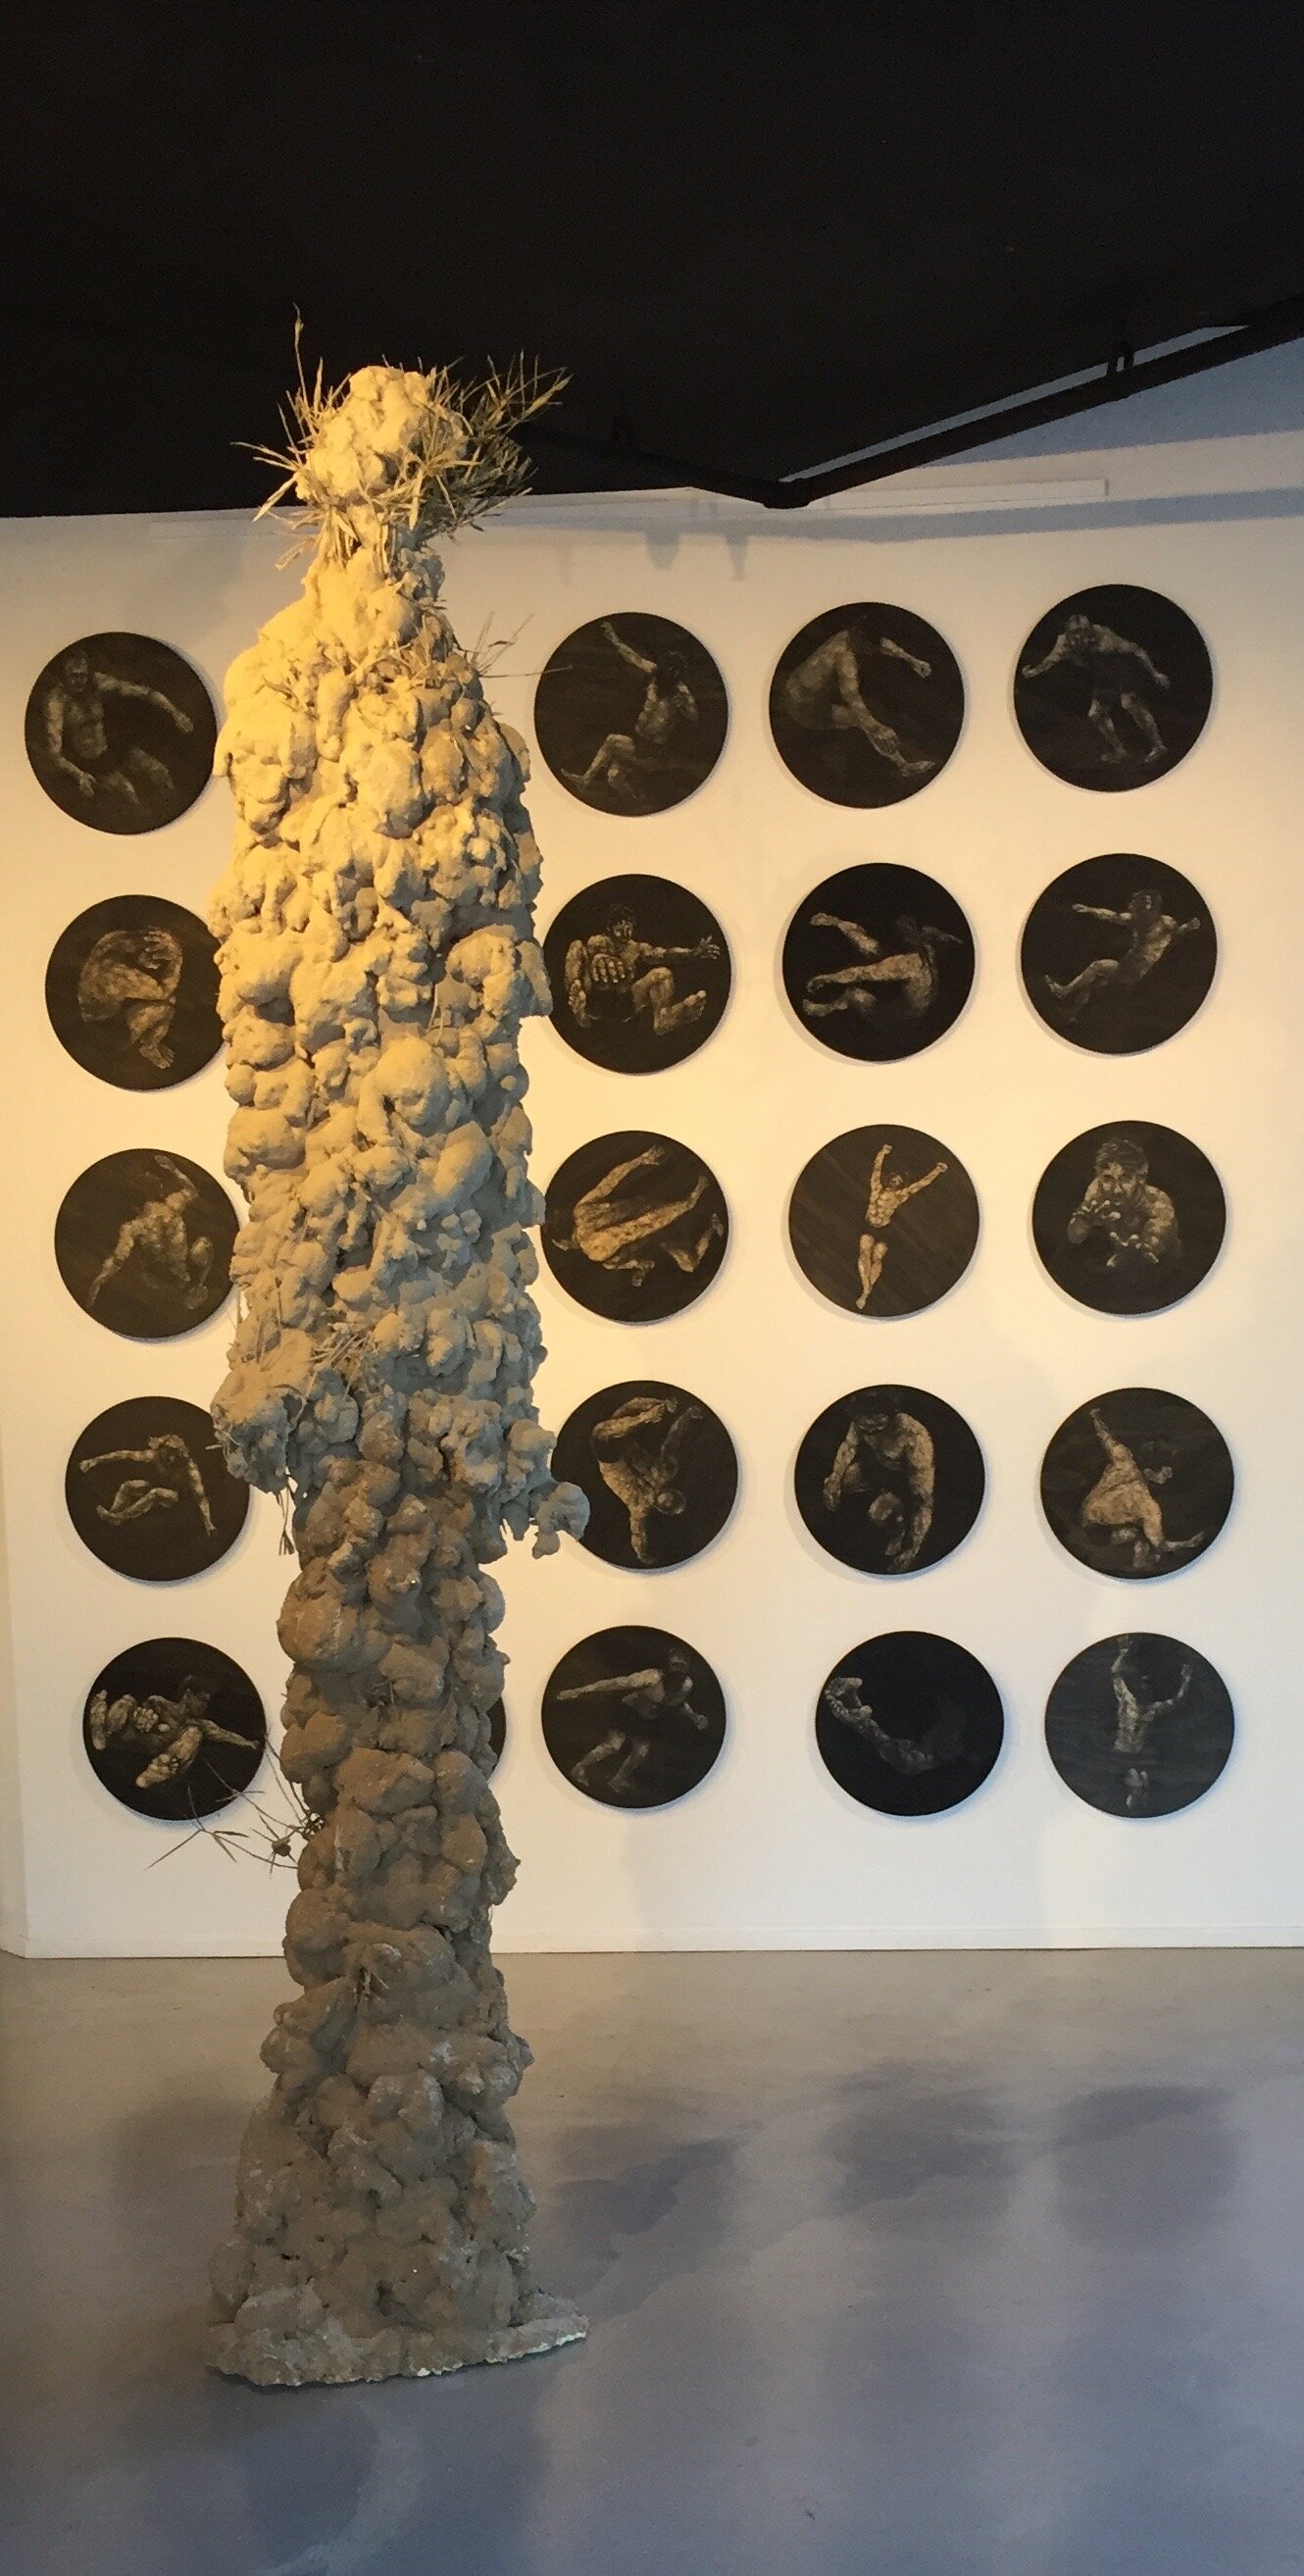 The Sandman and Perpetual Motion Wall Installation